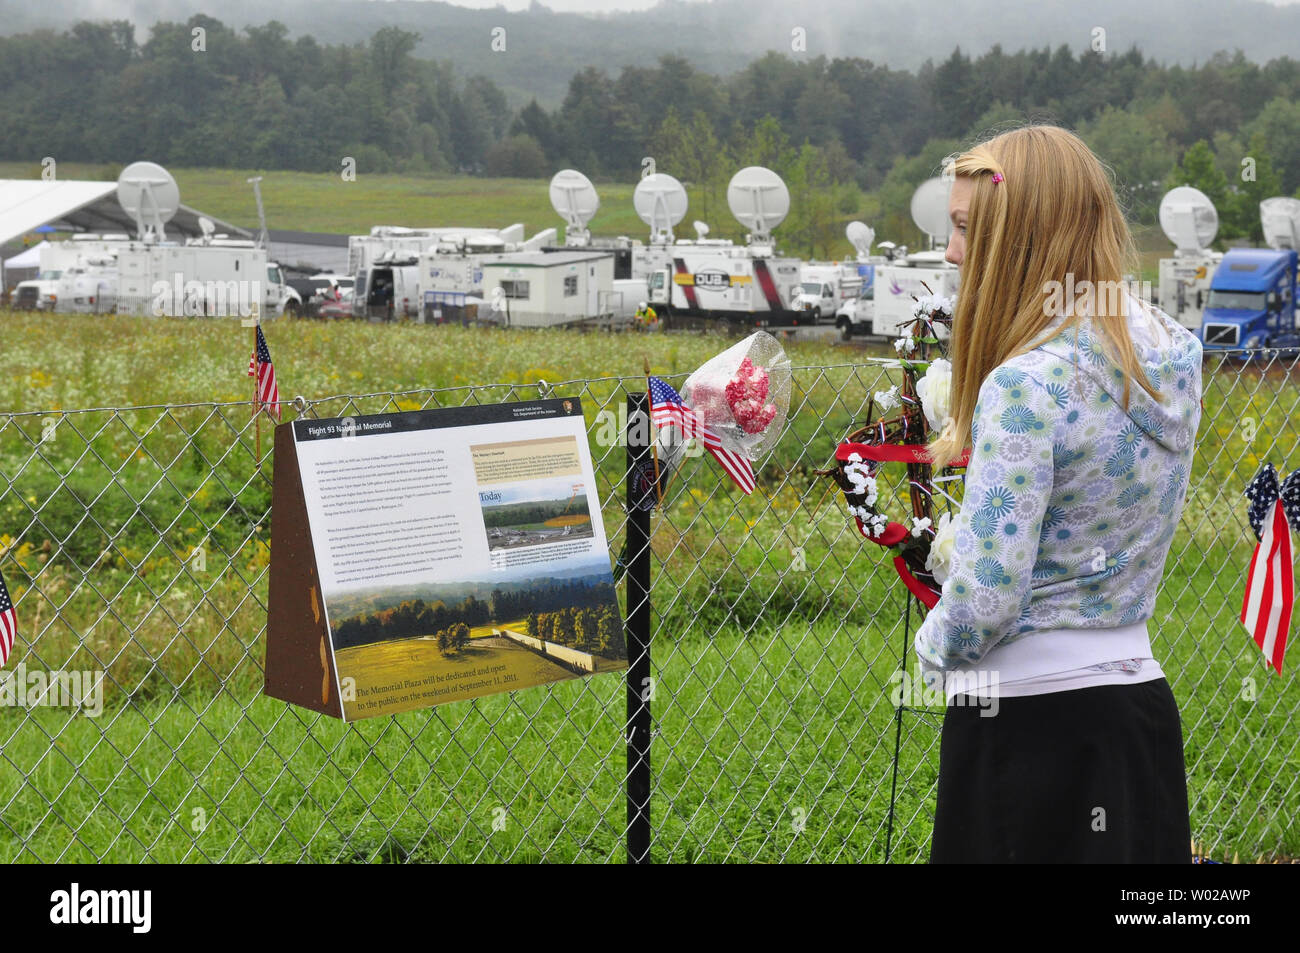 Media satellites trucks forms a backdrop for flags, messages and flowers left at the Temporary Memorial on September 9, 2011, the eve of the dedication of the permanent National Memorial overlooking the site of the crash site of Flight 93 where 40 people lost their lives 10 years ago in the terrorist attacks of September 11, 2001.   UPI/Archie Carpenter Stock Photo